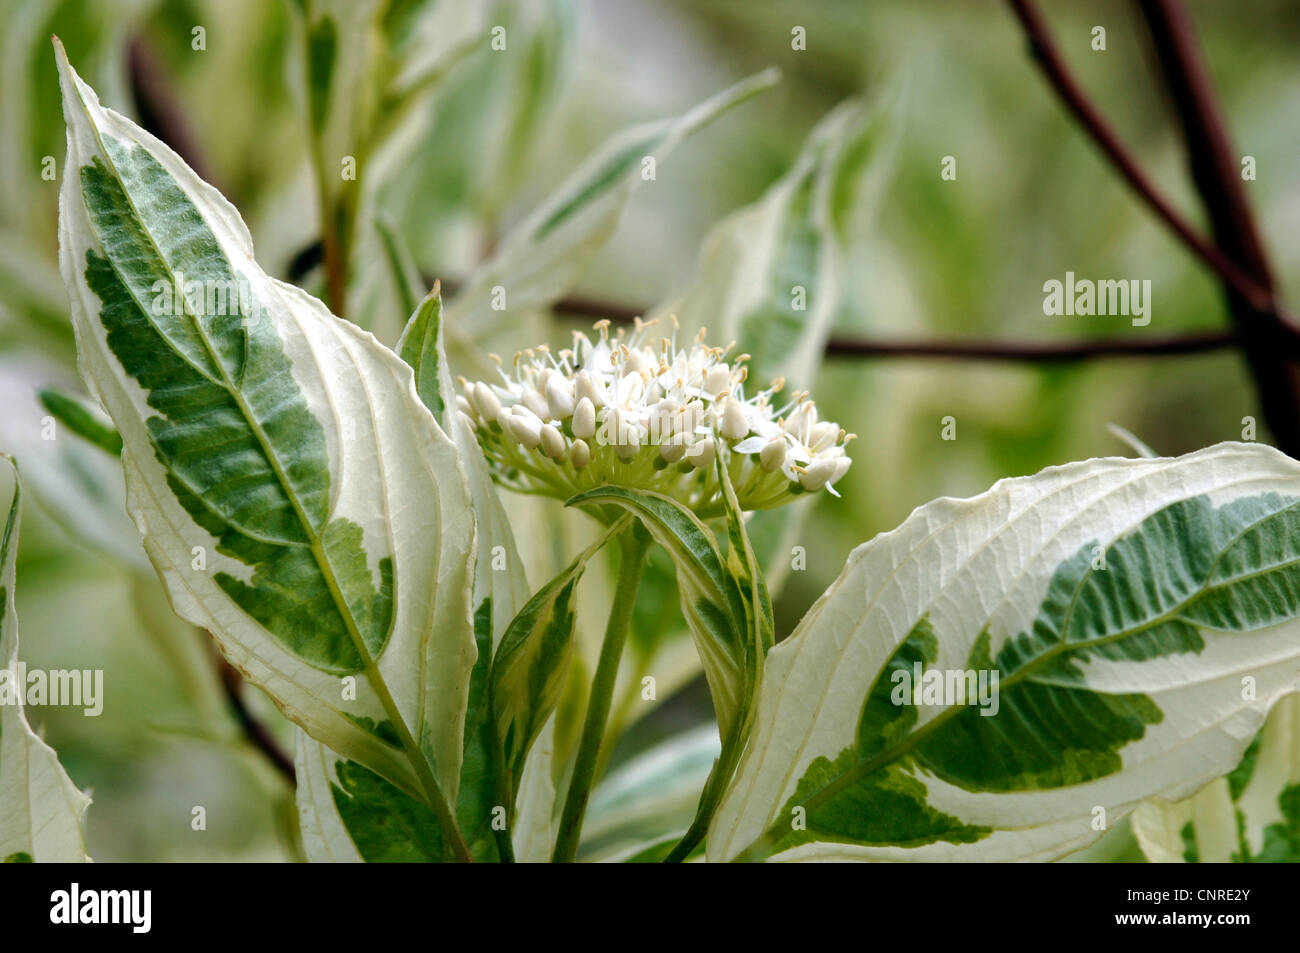 white dogwood, white-fruited dogwood, red-barked dogwood (Cornus alba 'Elegantissima', Cornus alba Elegantissima), blooming, with variegated leaves Stock Photo